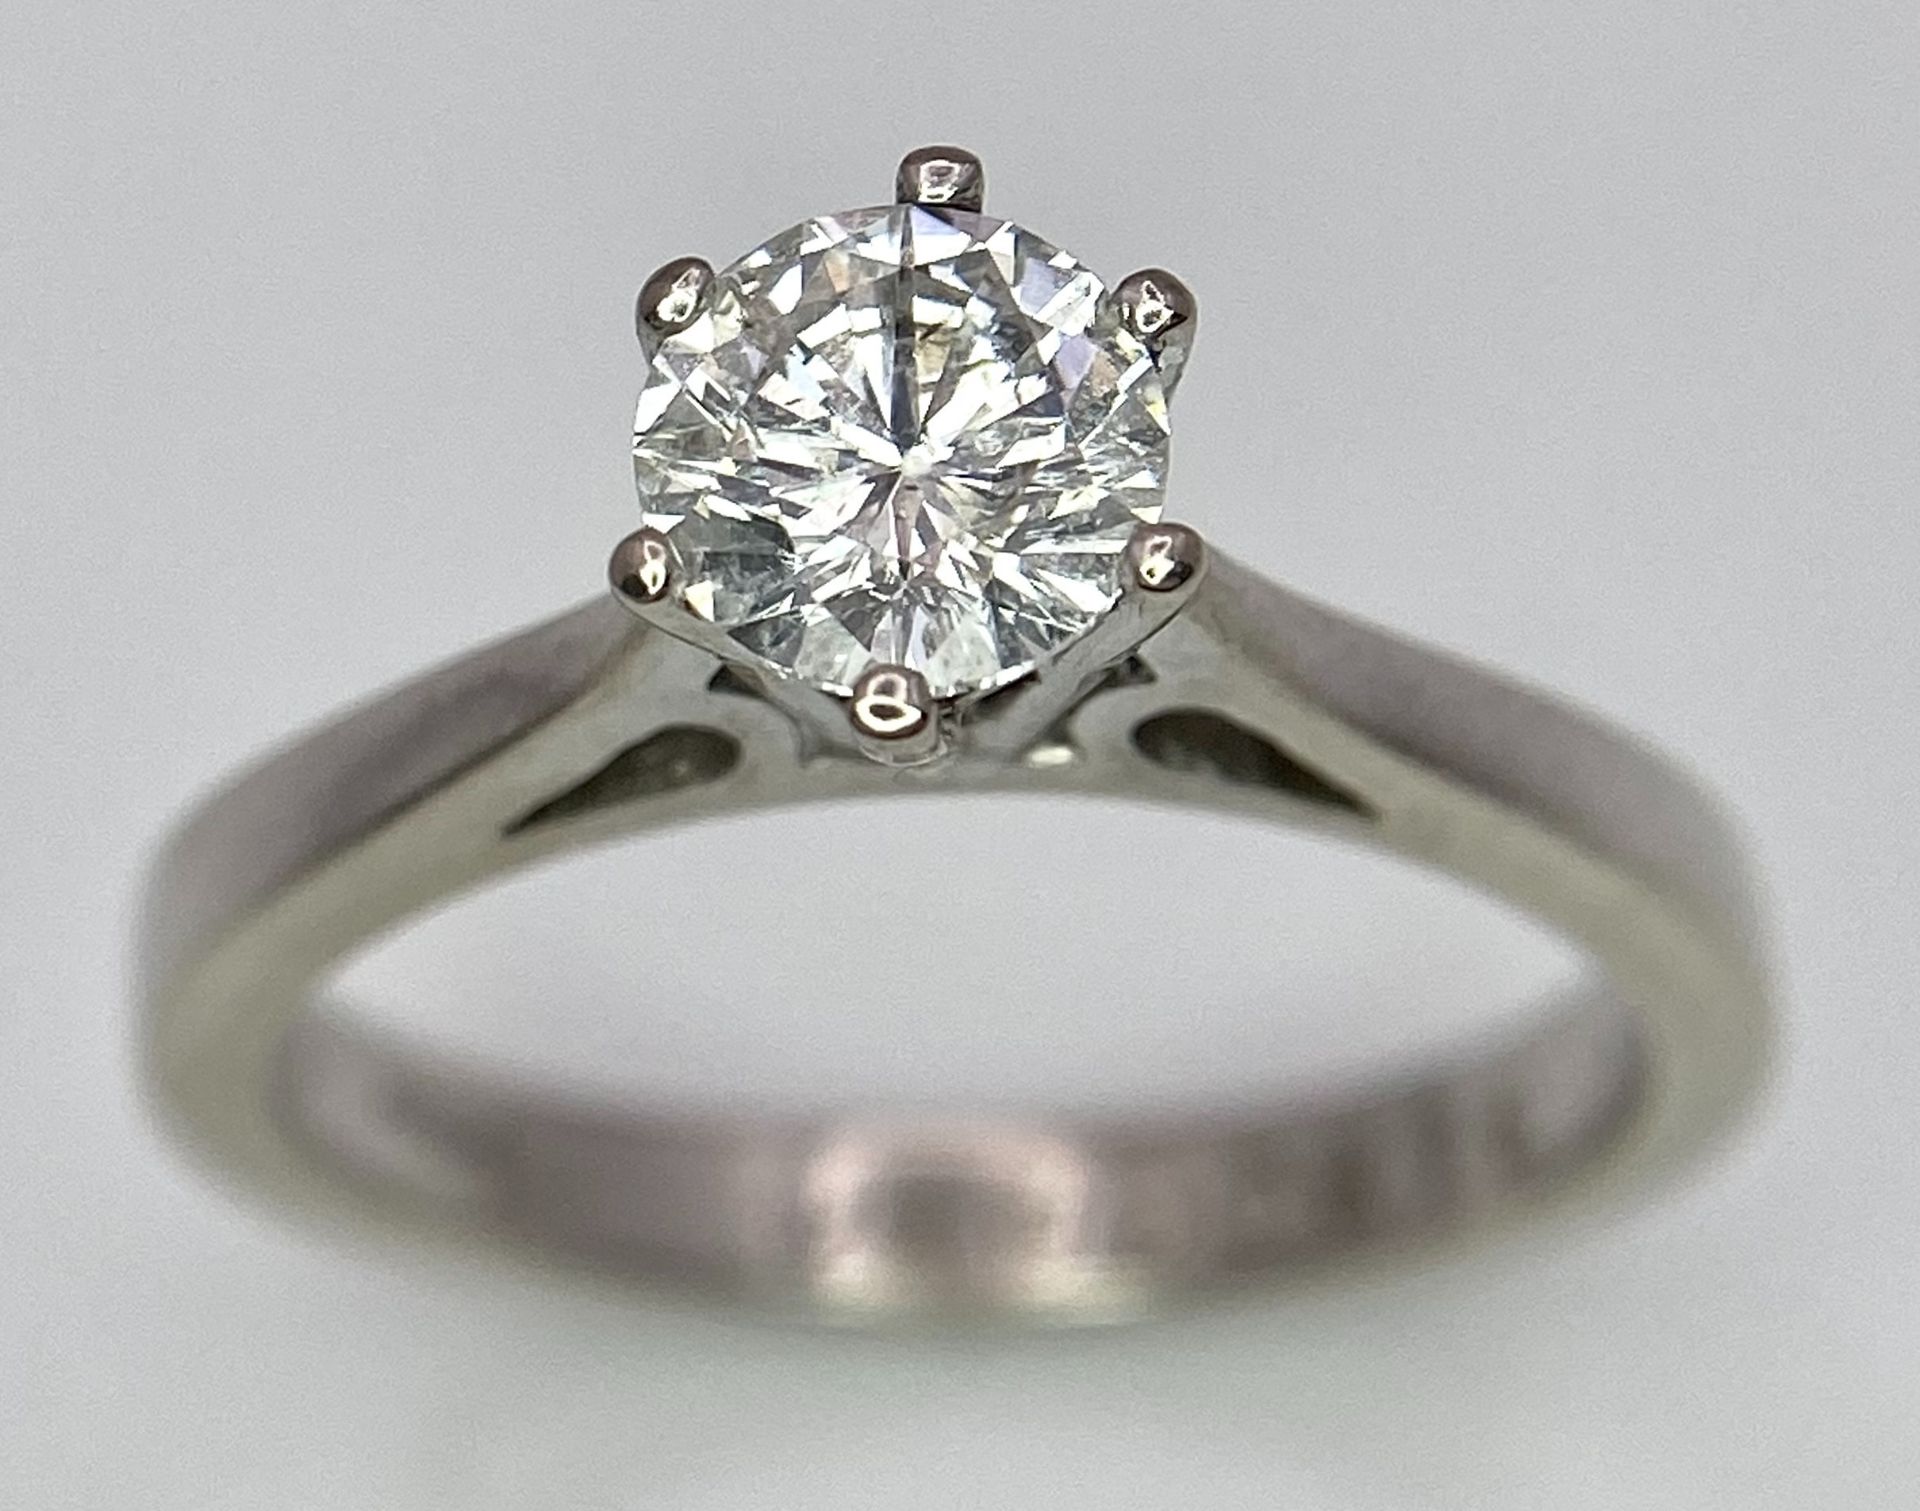 AN 18K WHITE GOLD DIAMOND SOLITAIRE RING - BRILLIANT ROUND CUT 0.70CT. 4.2G. SIZE M - Image 3 of 9